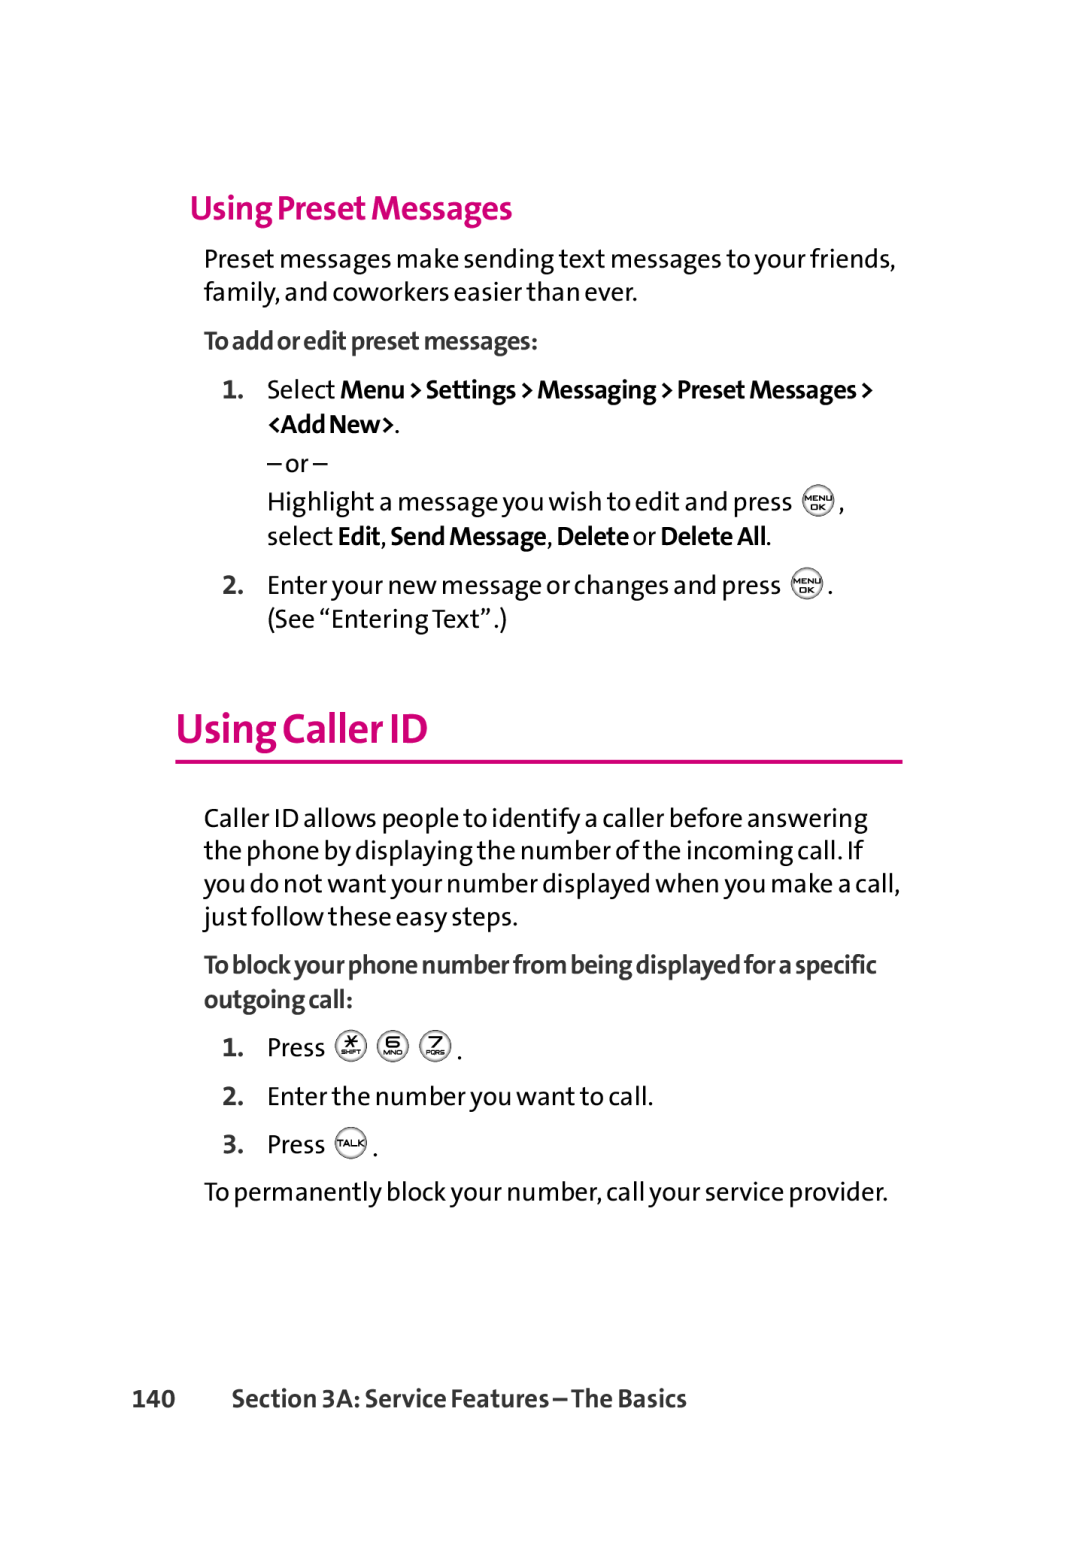 LG Electronics 350 manual Using Caller ID, Using PresetMessages, Toaddoreditpresetmessages, A Service Features - The Basics 